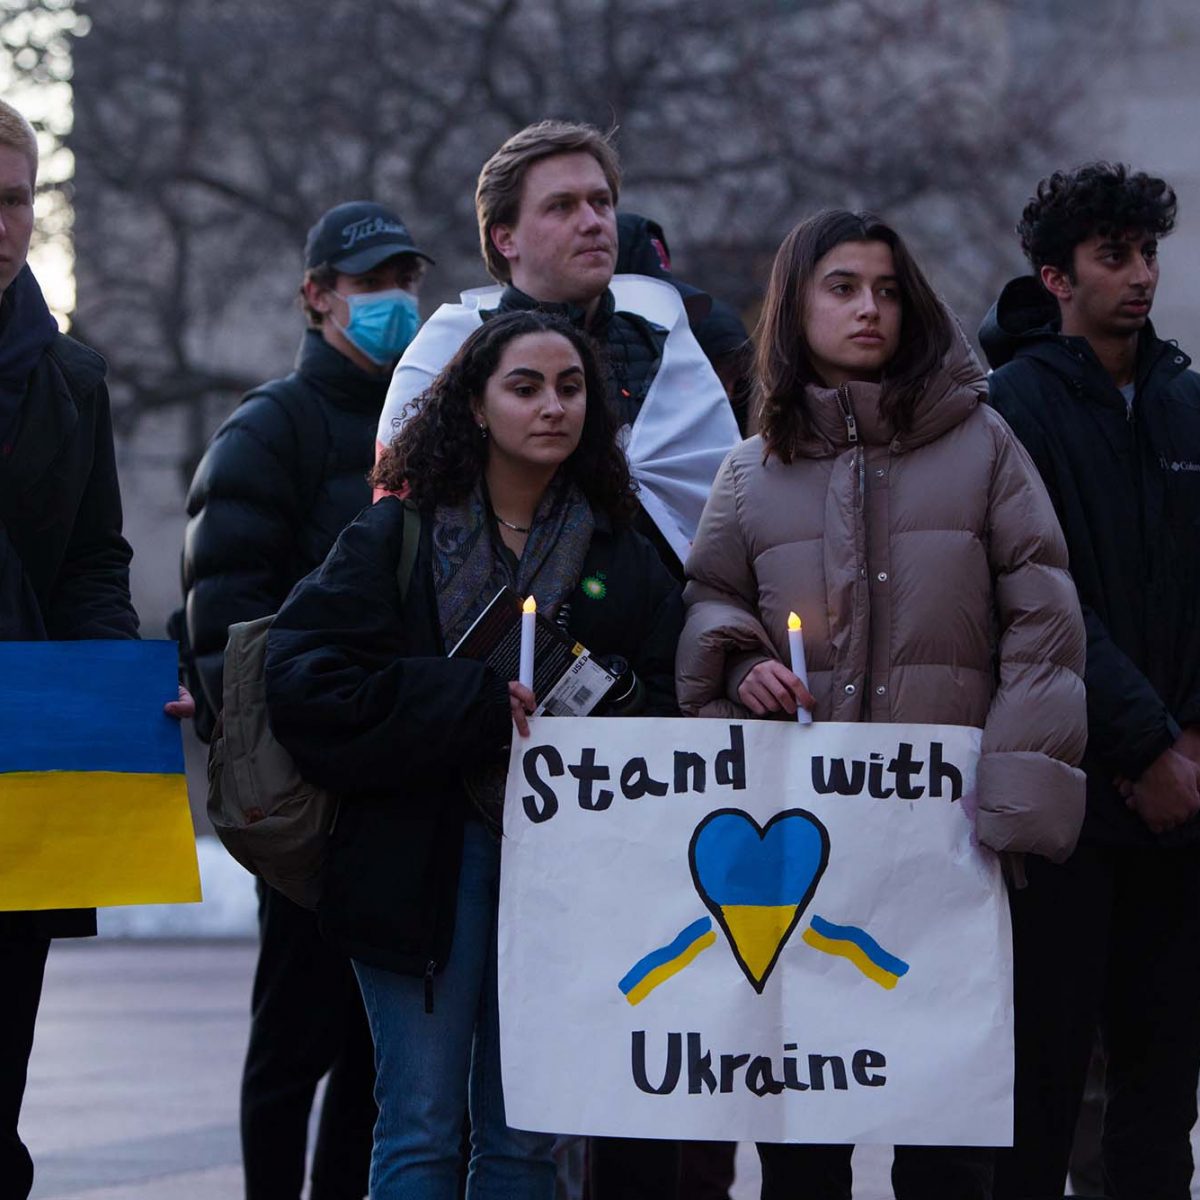 Hot Russian Teen Has Sex - As Russia's Attacks on Ukraine Continue, University Extends Efforts to Help  BU Students Affected | BU Today | Boston University